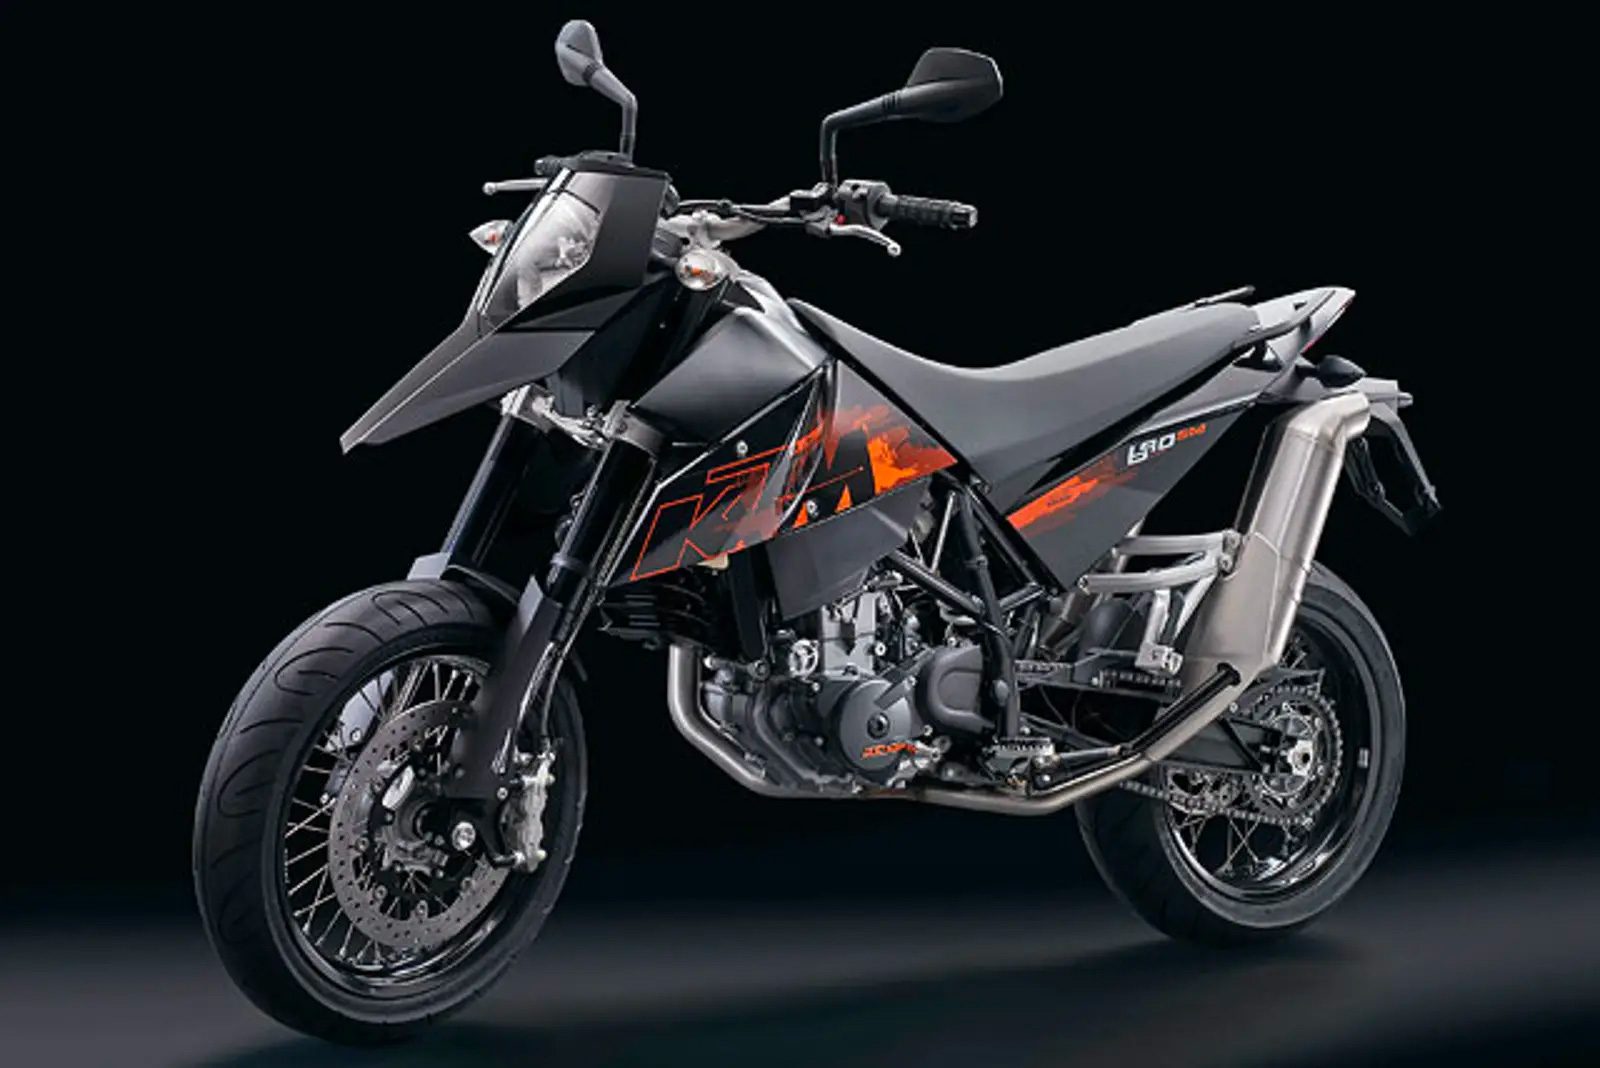 A 2007 KTM LC4 690 motorcycle